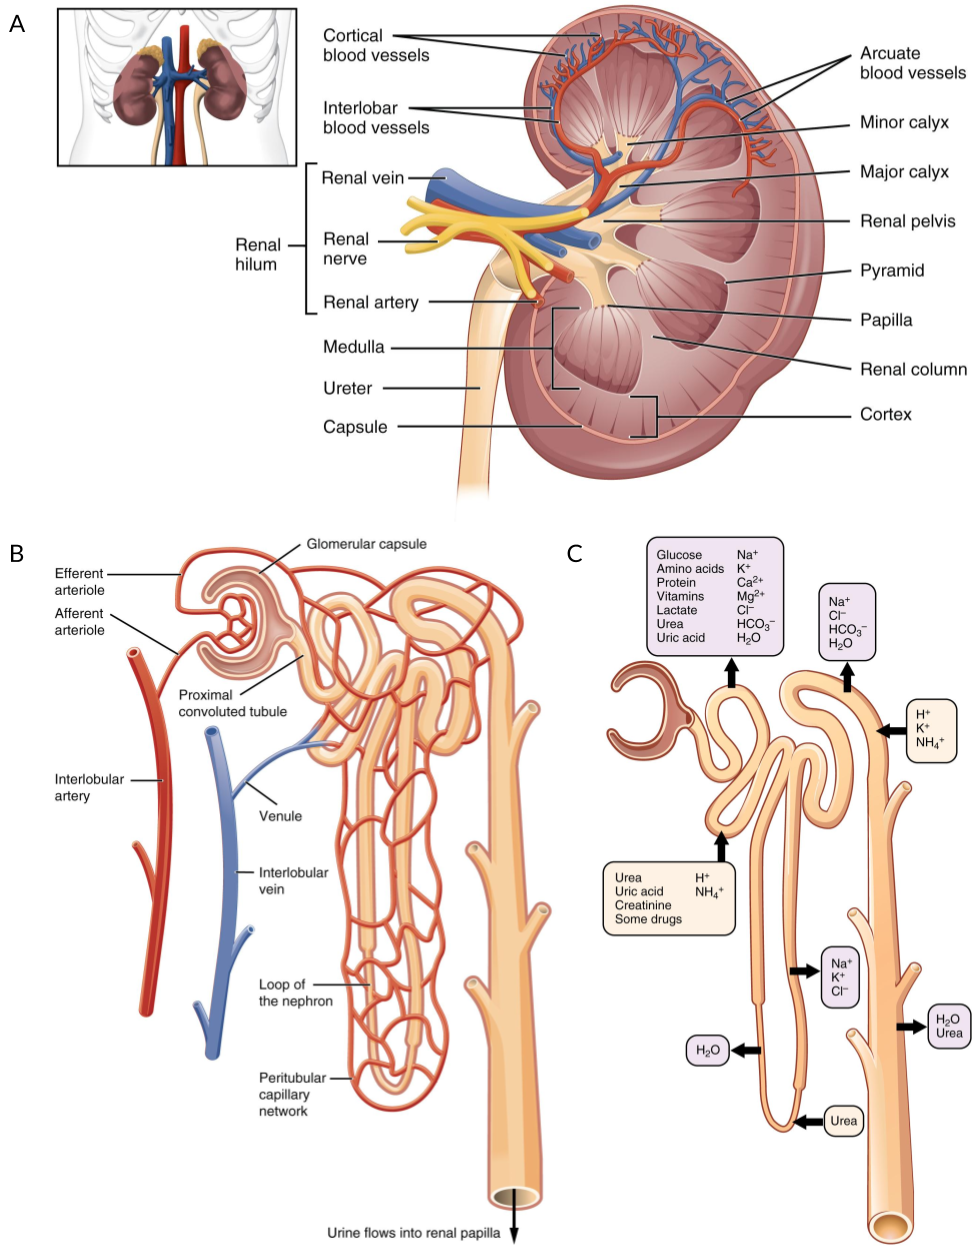 Structure of the kidney and nephron. (A) Blood flows into the kidney via the renal artery which branches into ever smaller capillaries. (B) At the end of these capillaries is the nephron, the functional filtration unit of the kidney, which is surrounded by a capillary network. (C) Different segments of the kidney are responsible for transferring specific molecular species between the bloodstream and the filtrate. Figure adapted using images from OpenStax College via Wikimedia Commons under a CC BY 3.0 license.